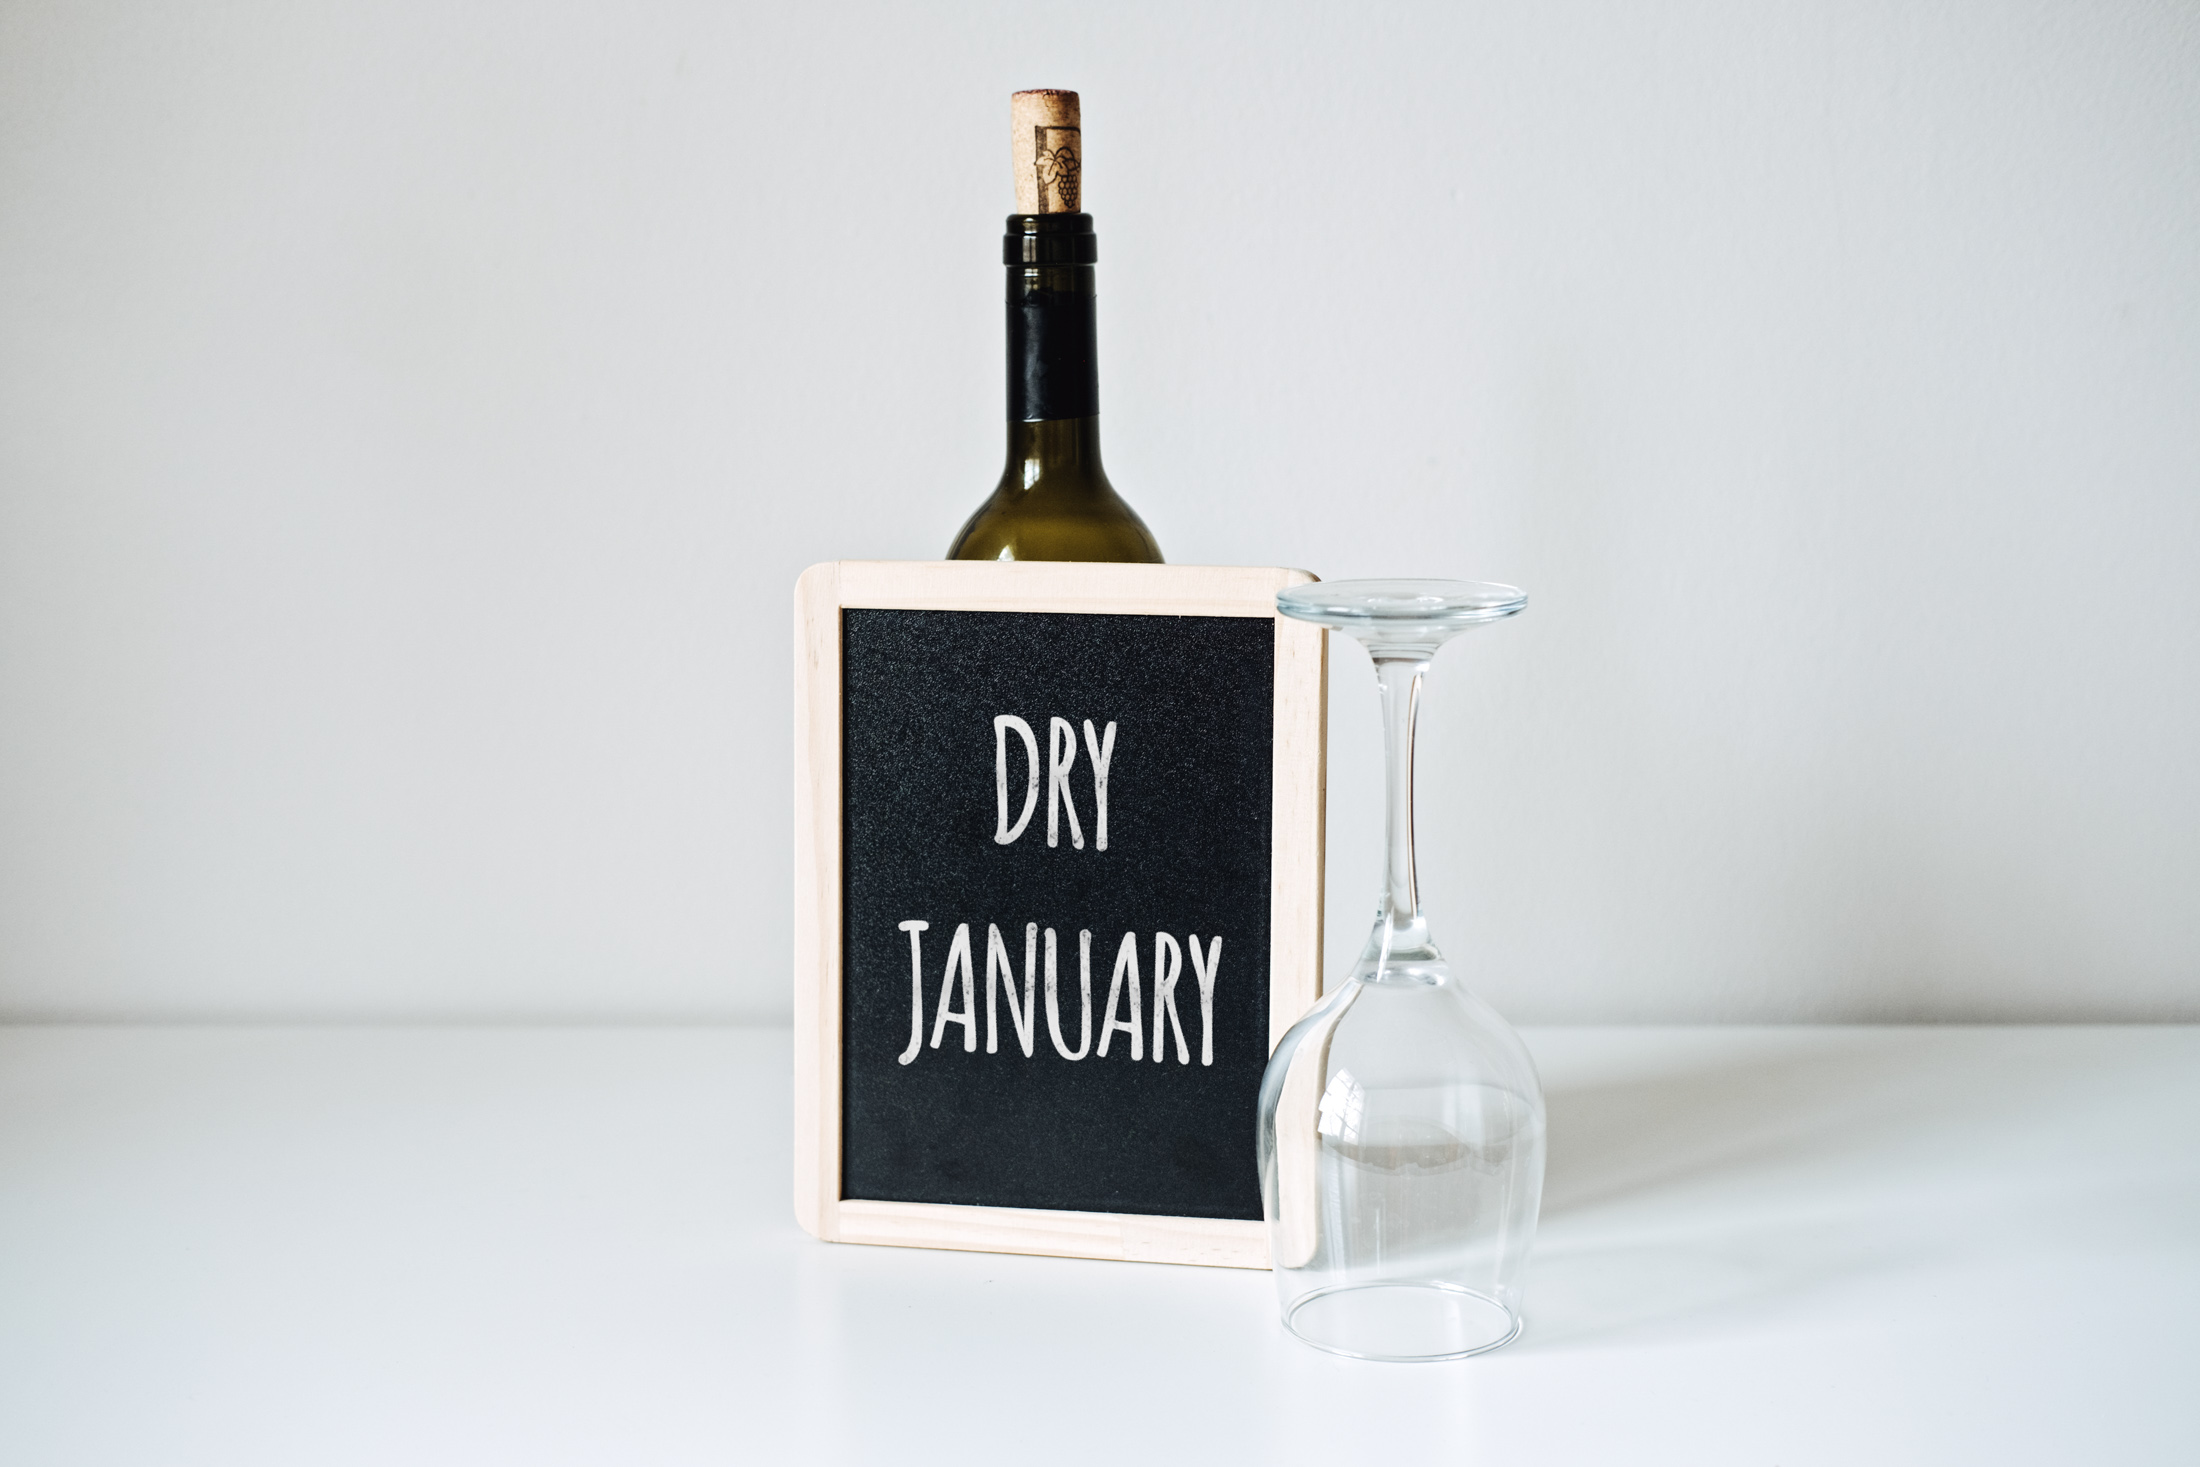 More and more people are signing up for Dry January. But staying the course is tough.